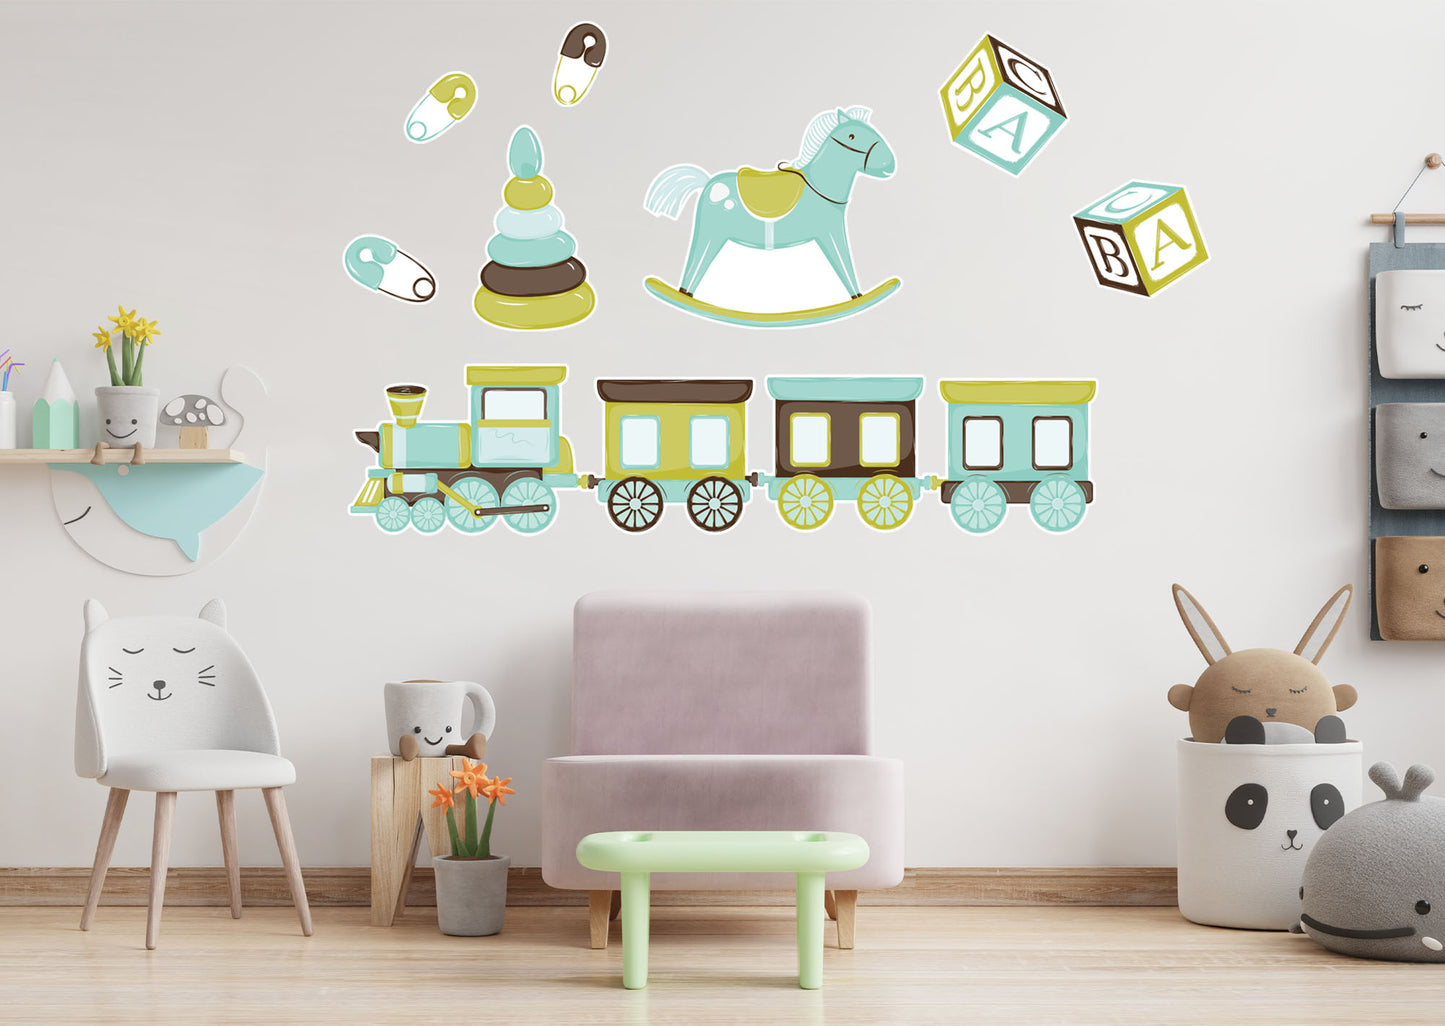 Nursery:  Green And Blue Toys Collection        -   Removable Wall   Adhesive Decal